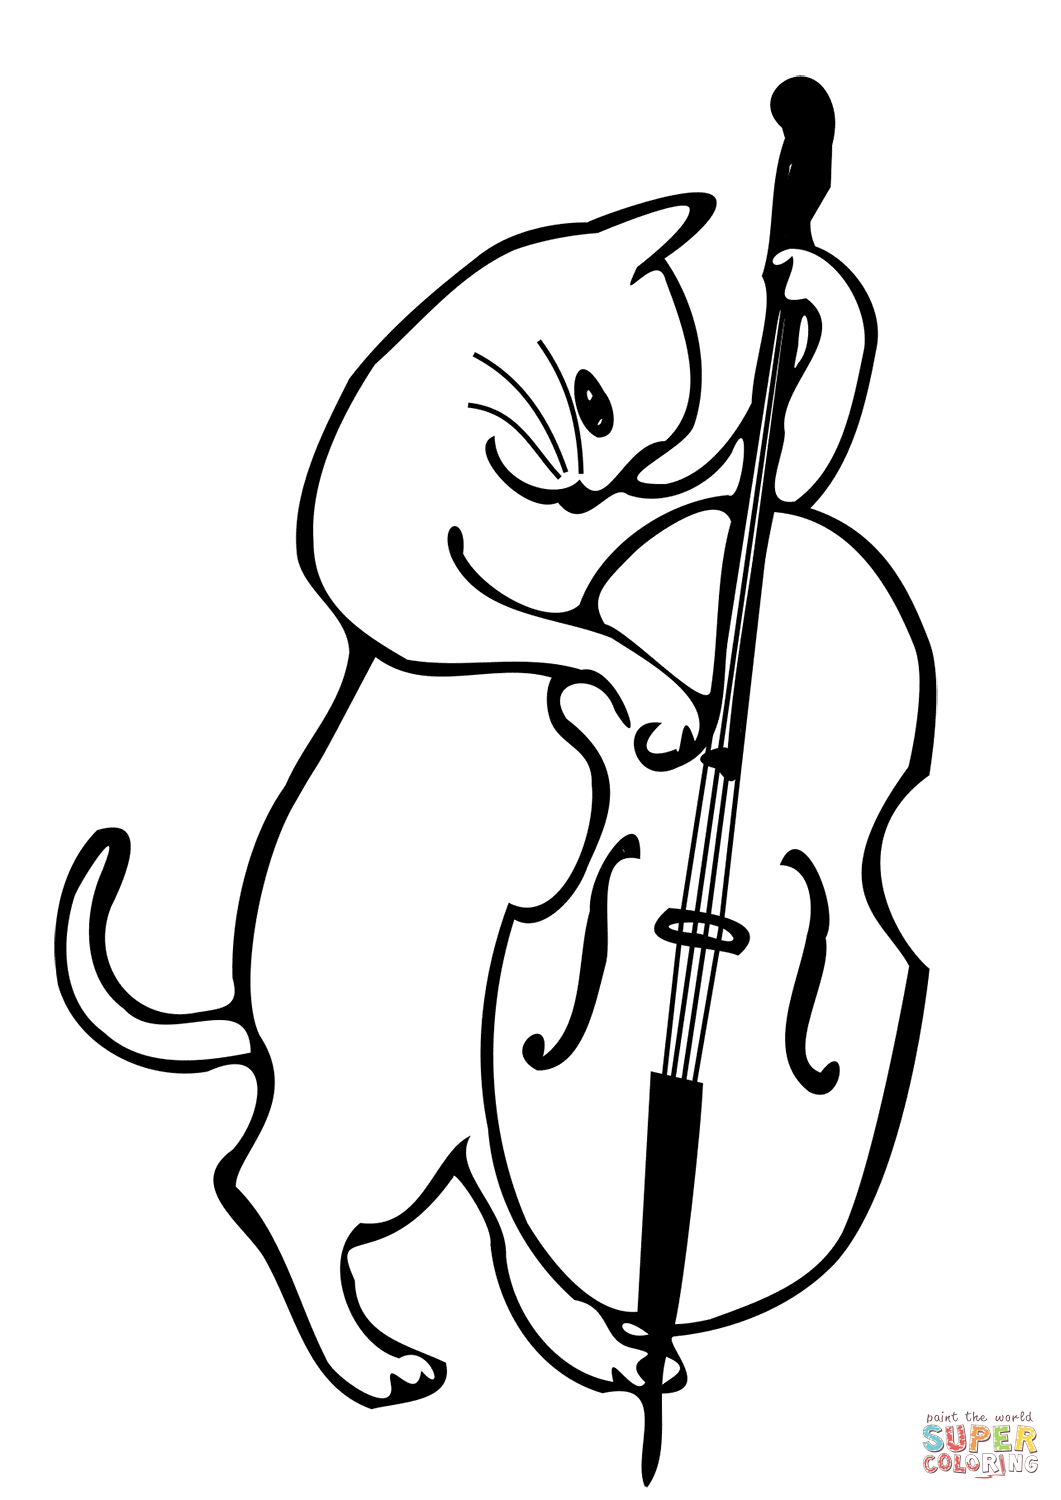 Cat playing a double bass coloring page free printable coloring pages